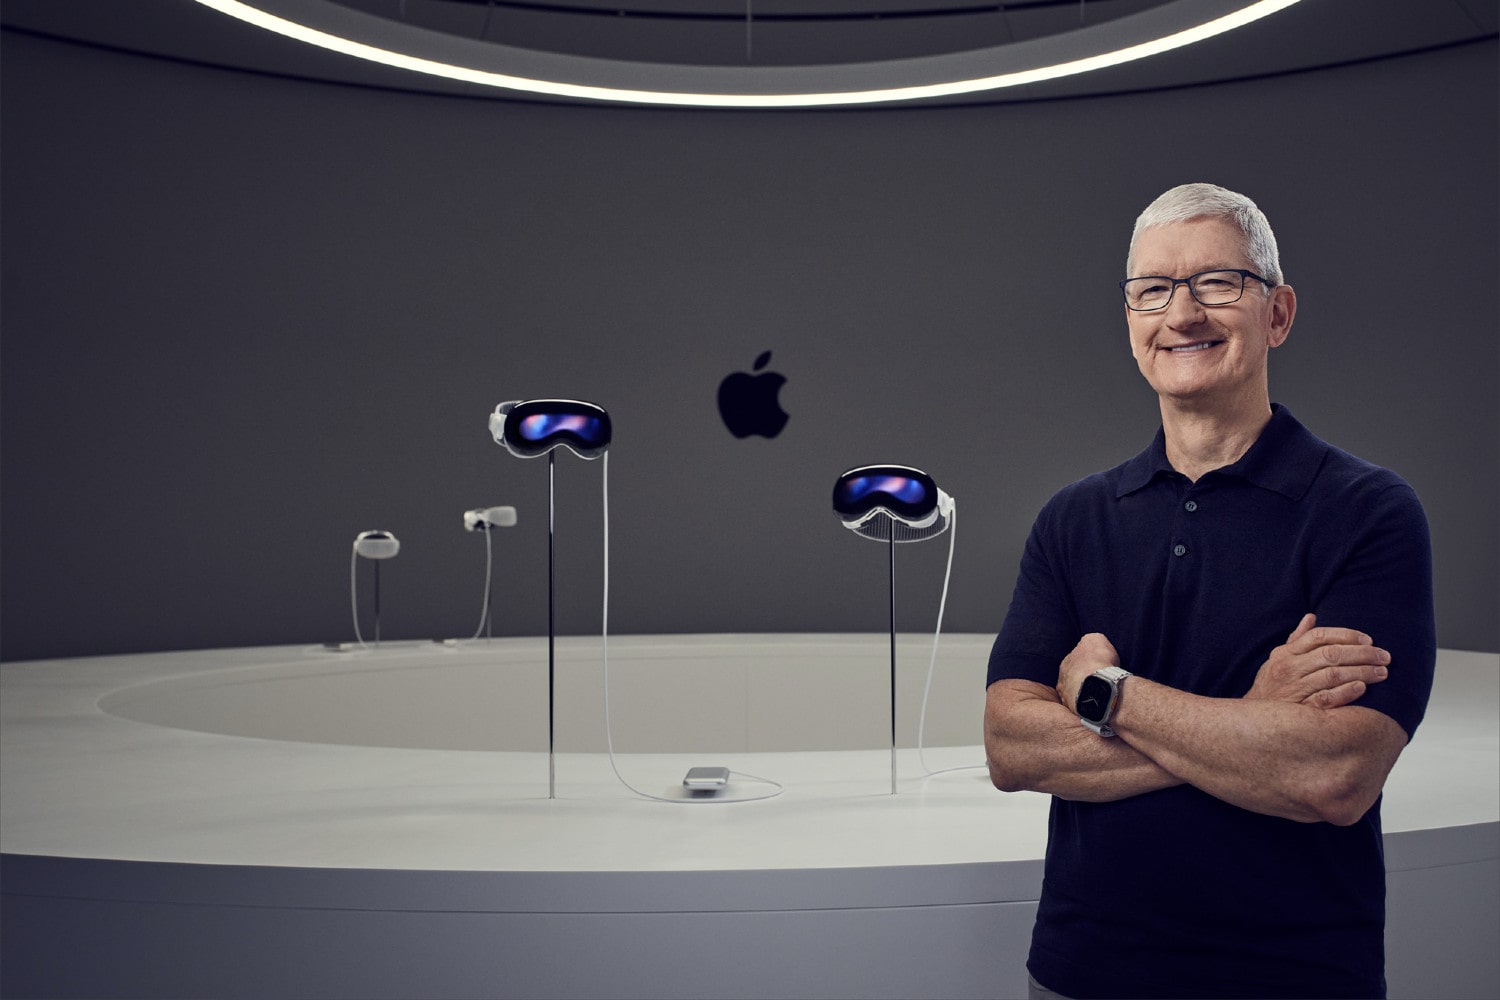 Apple's Vision Pro headset officially launches on February 2